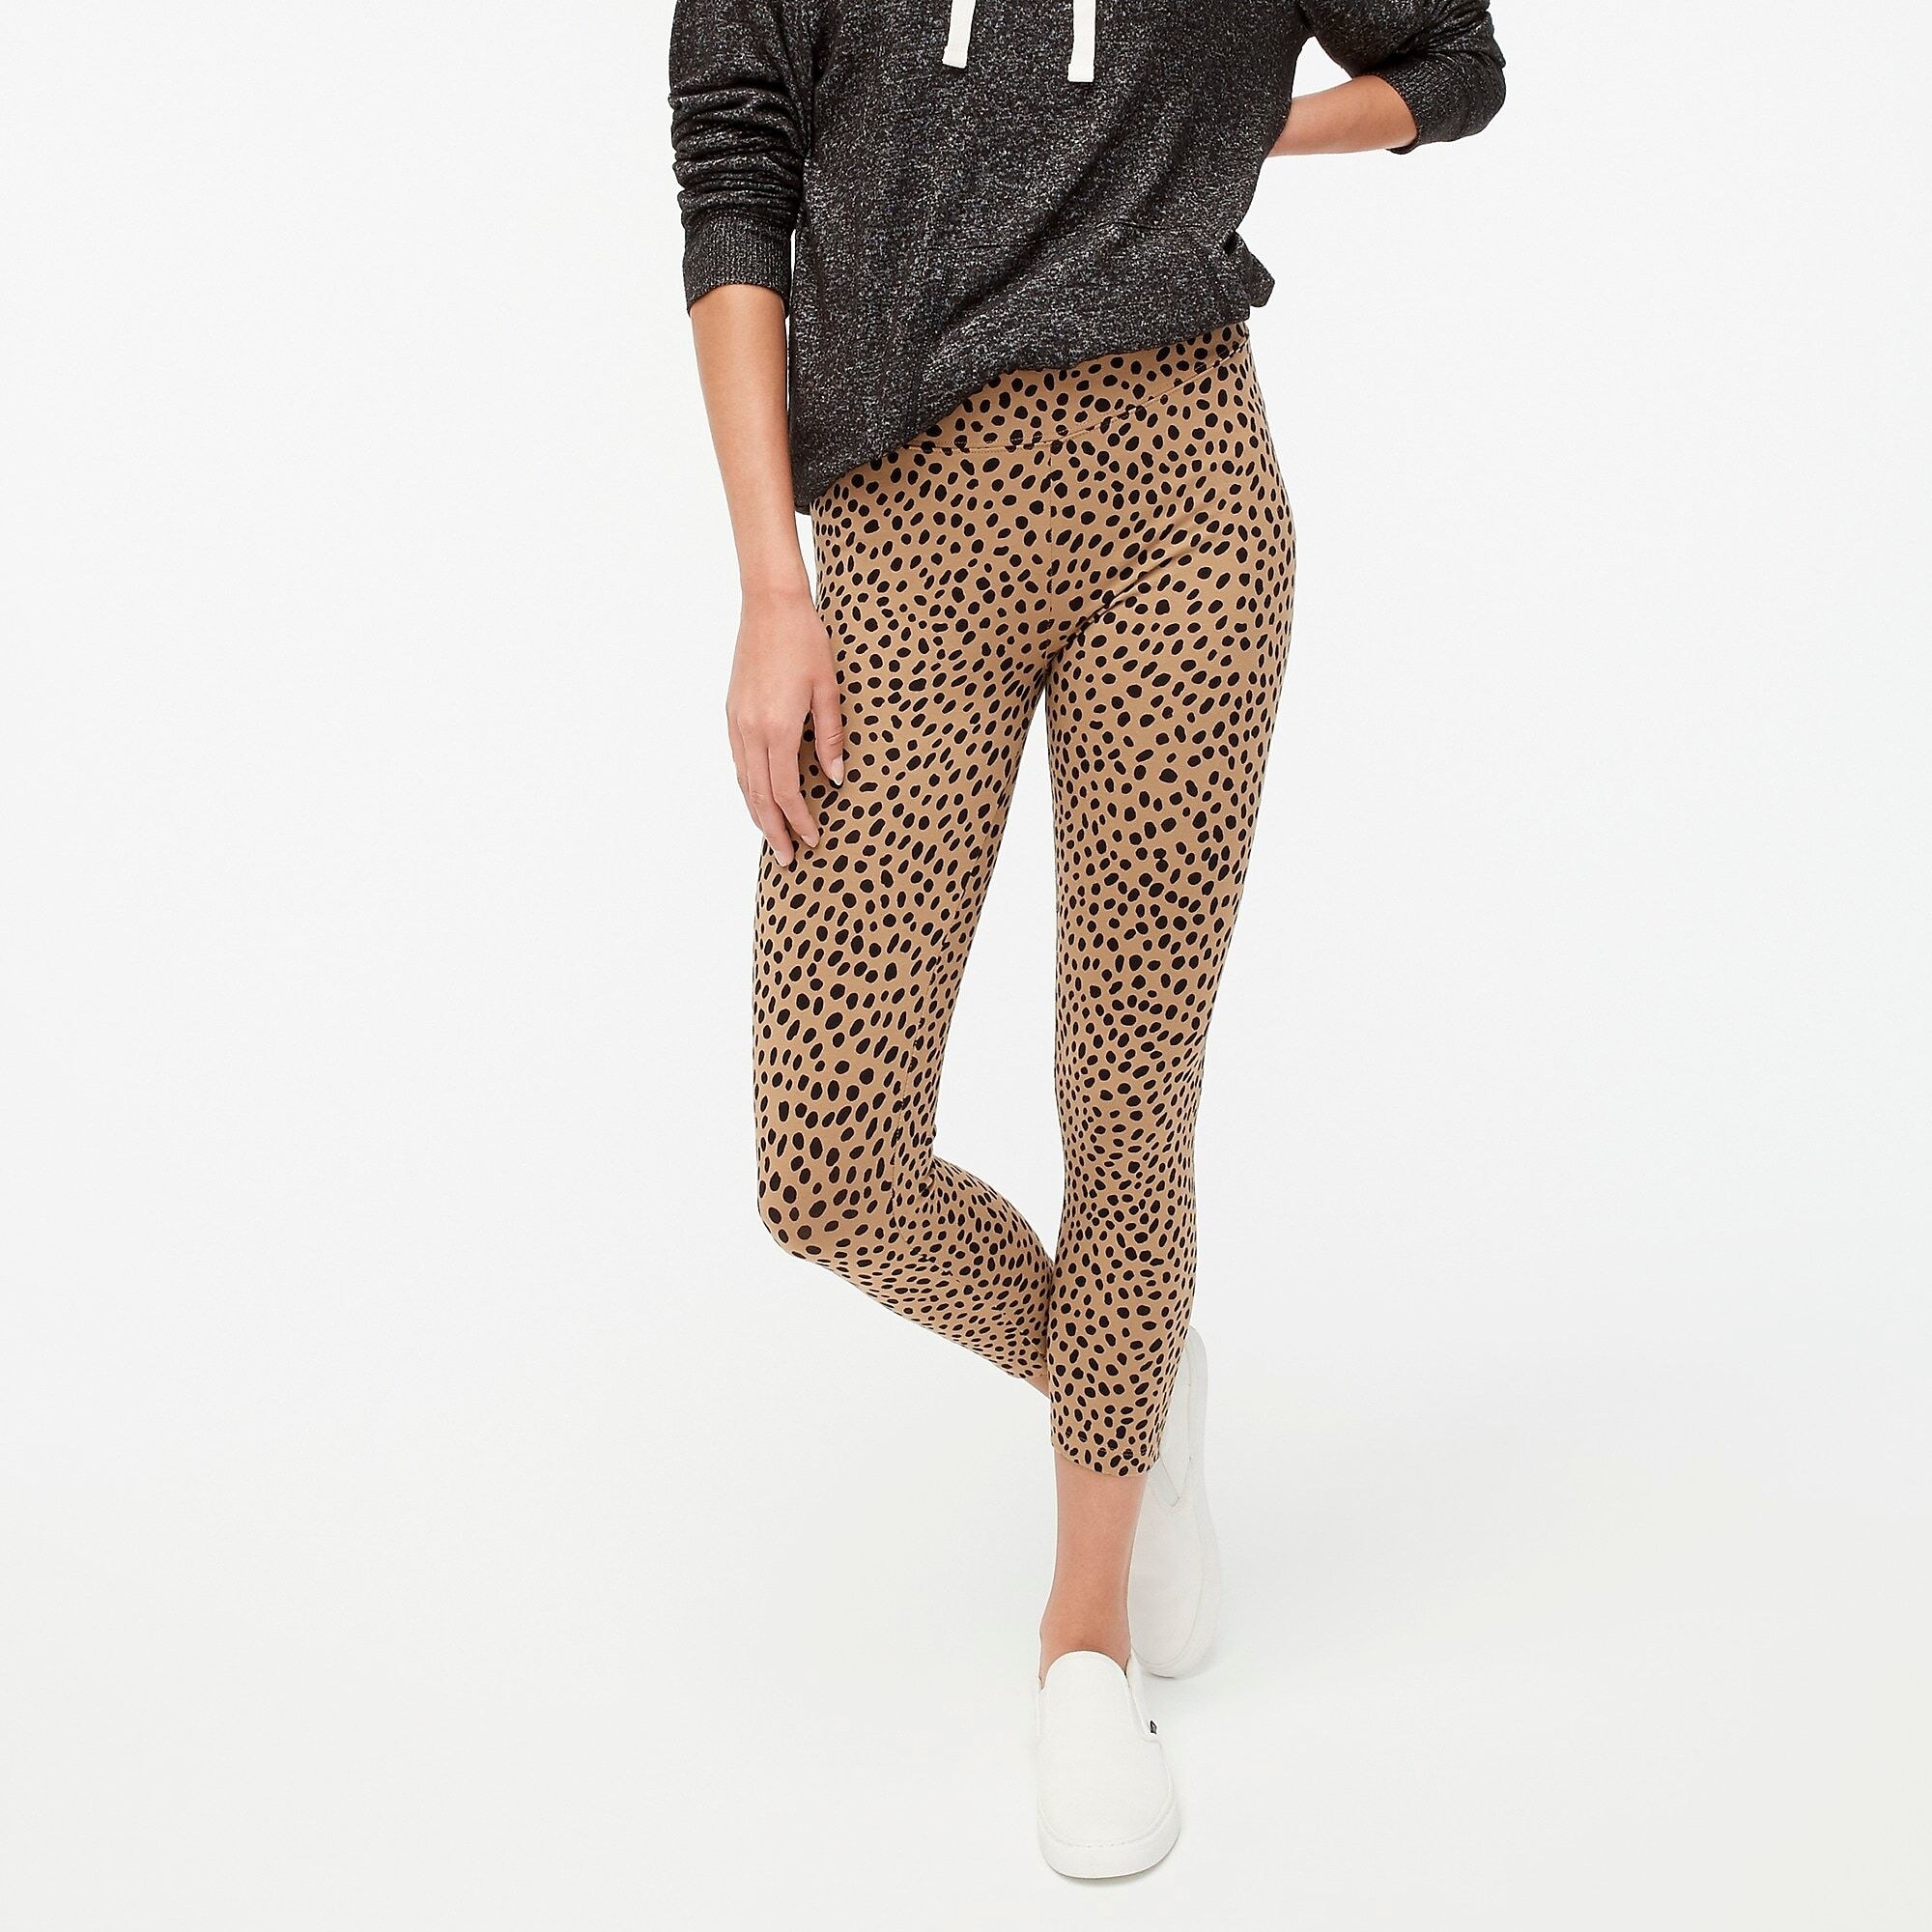 Model wearing the camel cropped everyday leggings